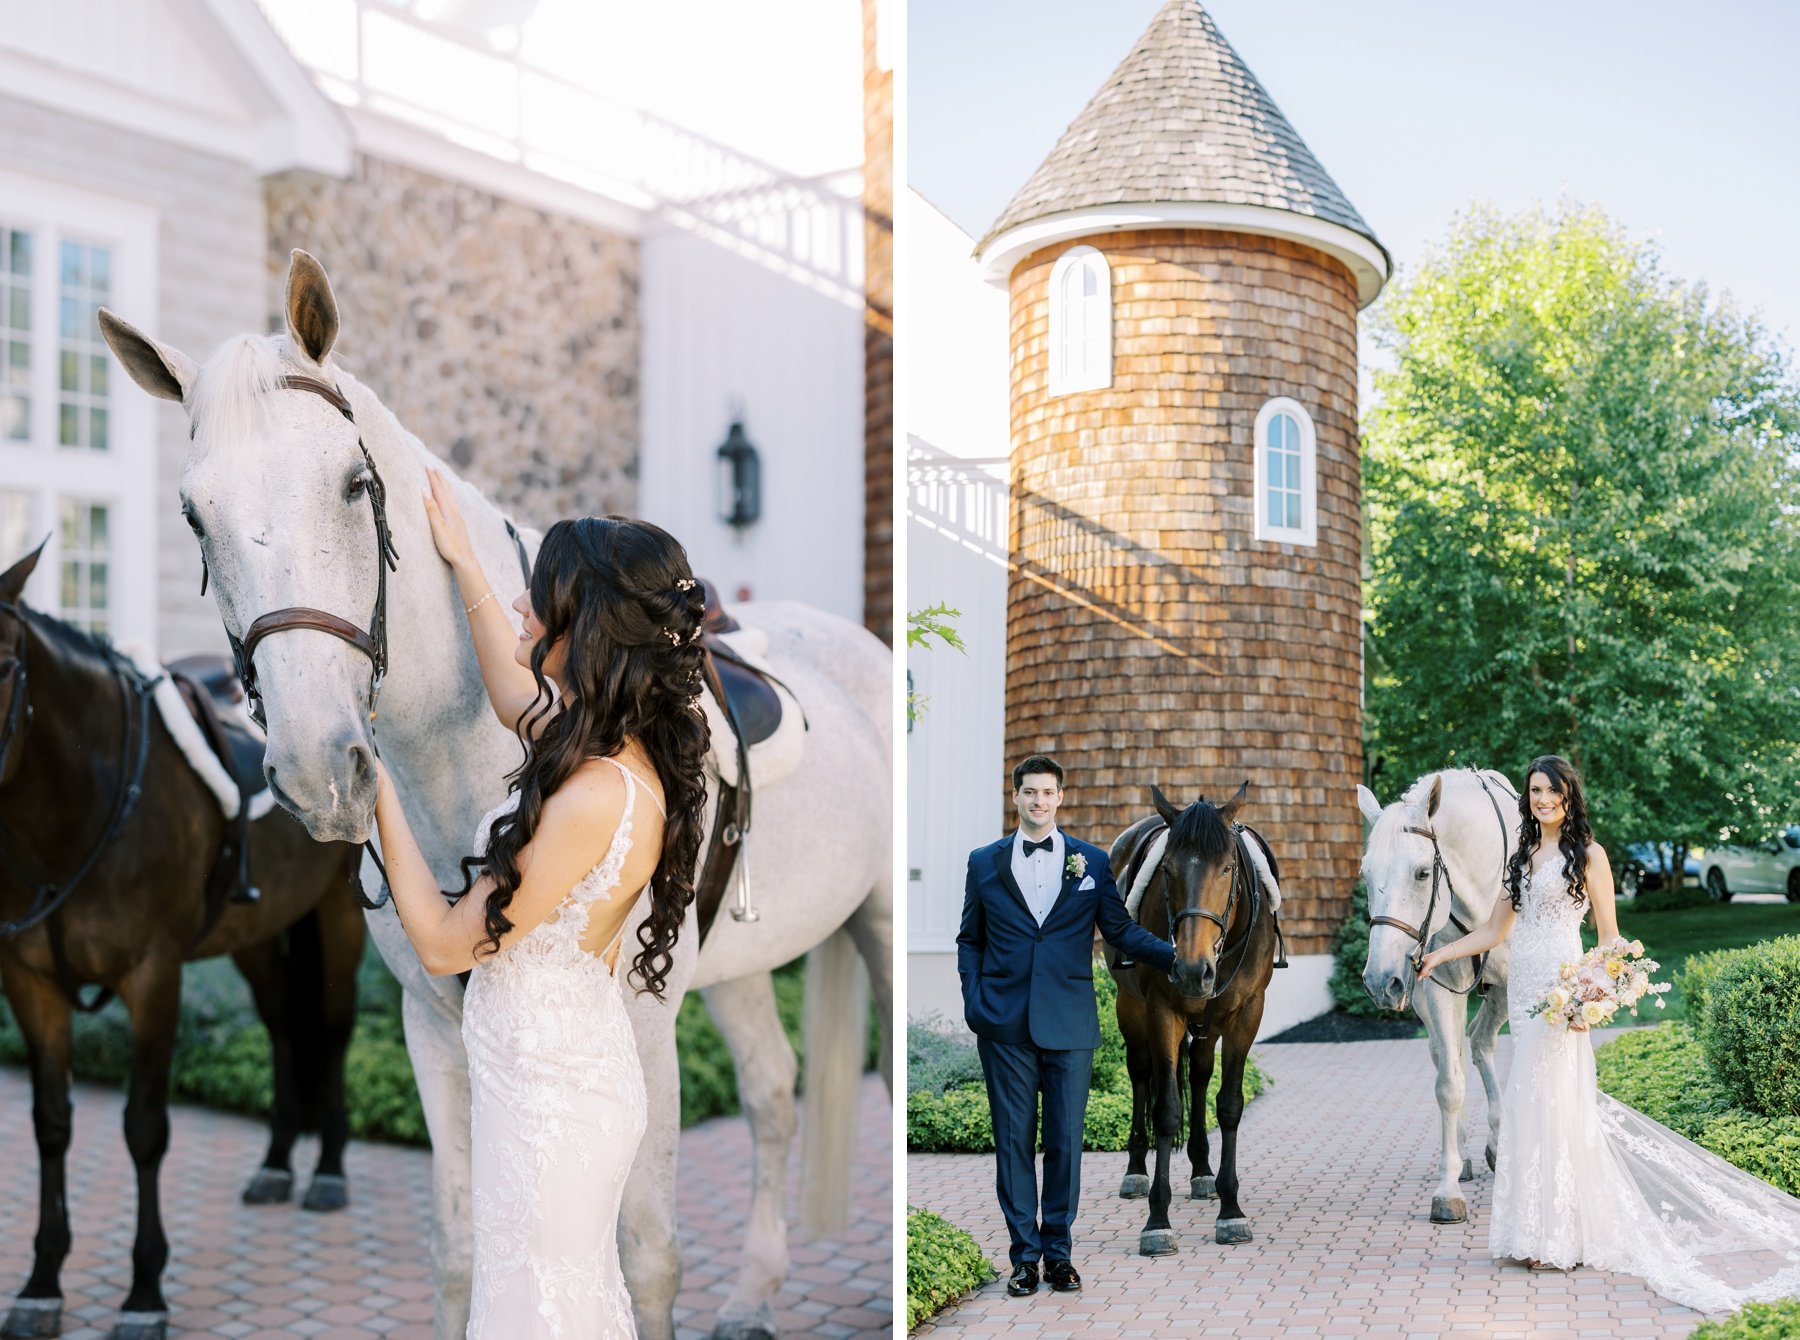 Bridal portraits with horses from Five Star Equine at Liberty Farm, NJ